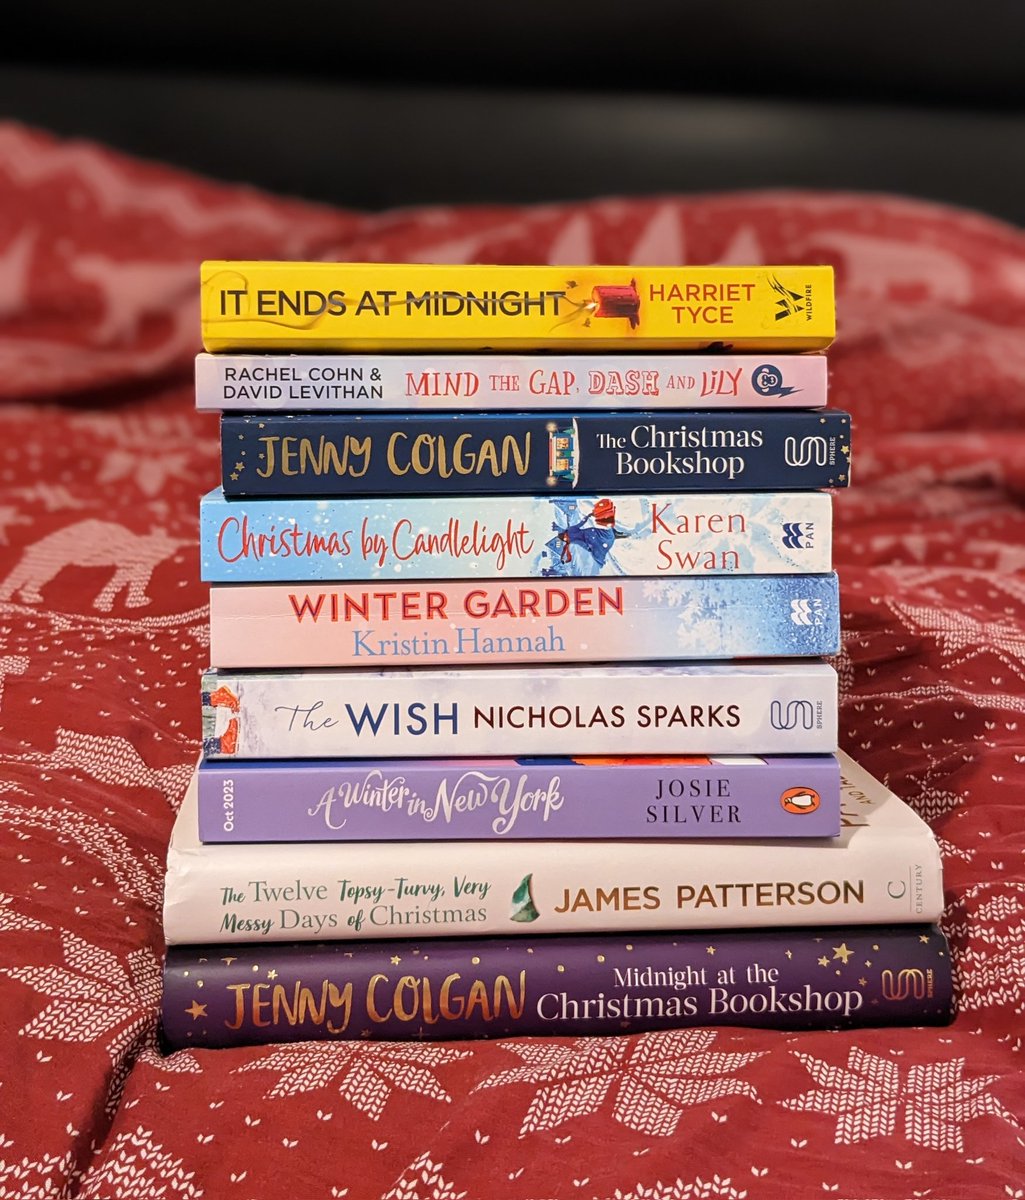 December 1st! The Christmas bedding is on and the festive tbr is stacked! Do you spot any here on your tbr or that you would recommend?

#festivetbr #christmasbedding #seasonalreading #booktwt #booktwitter #uptoolatereading